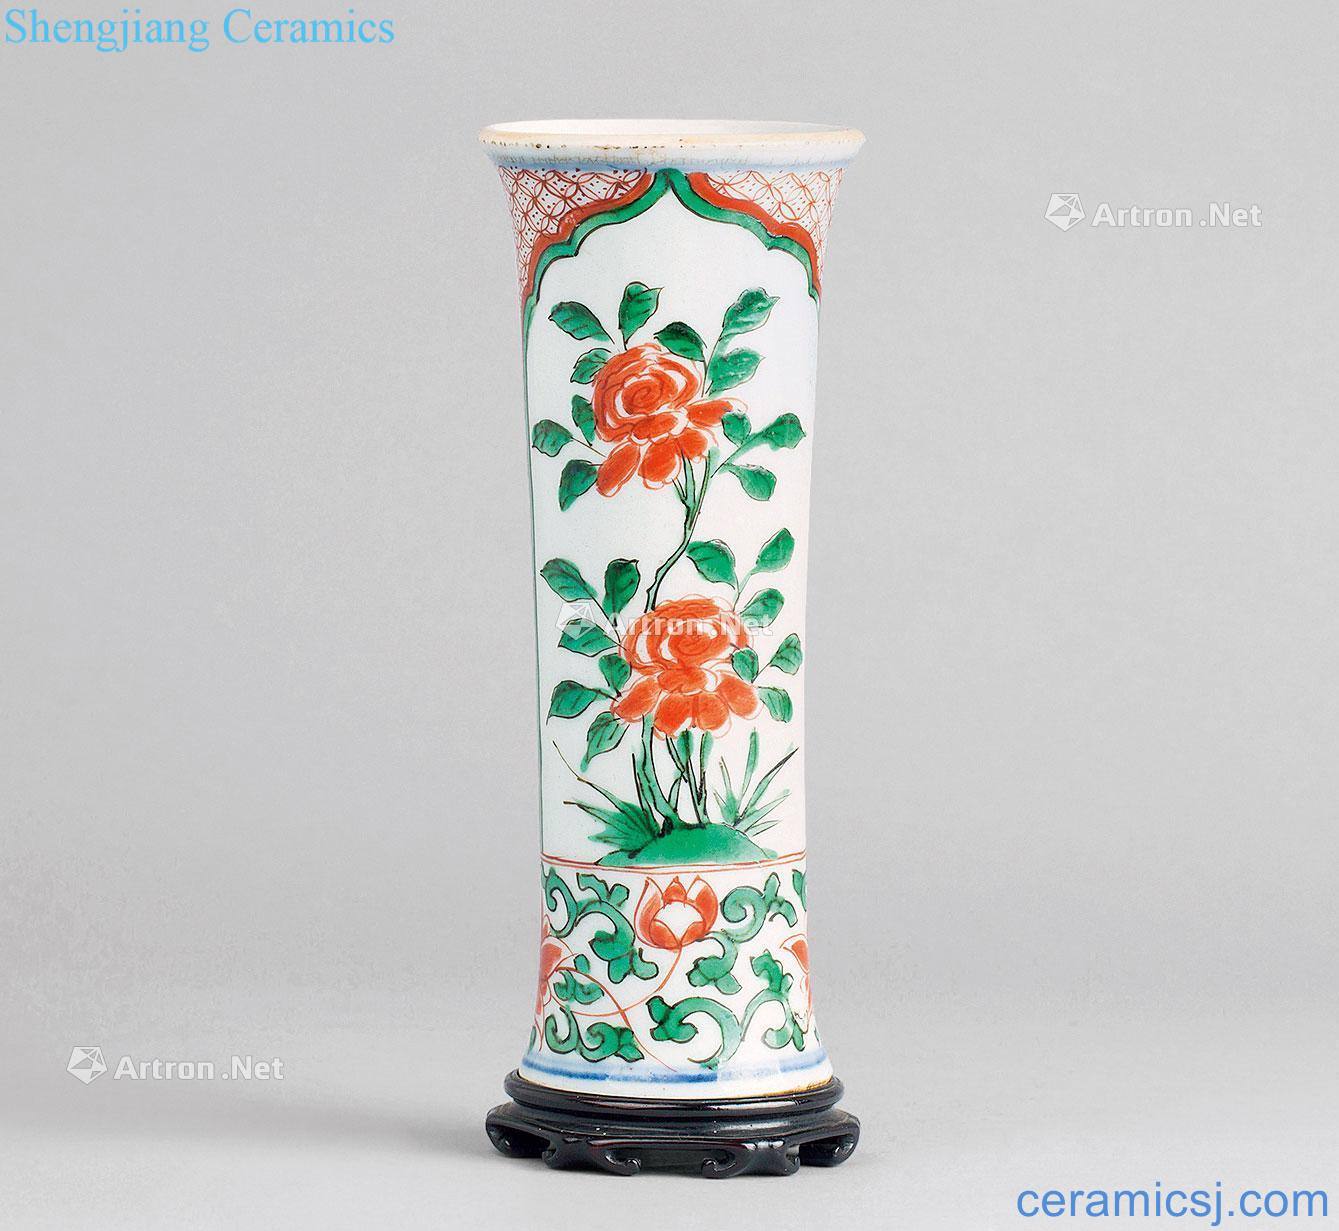 In the qing dynasty Colorful lines flower vase with flowers